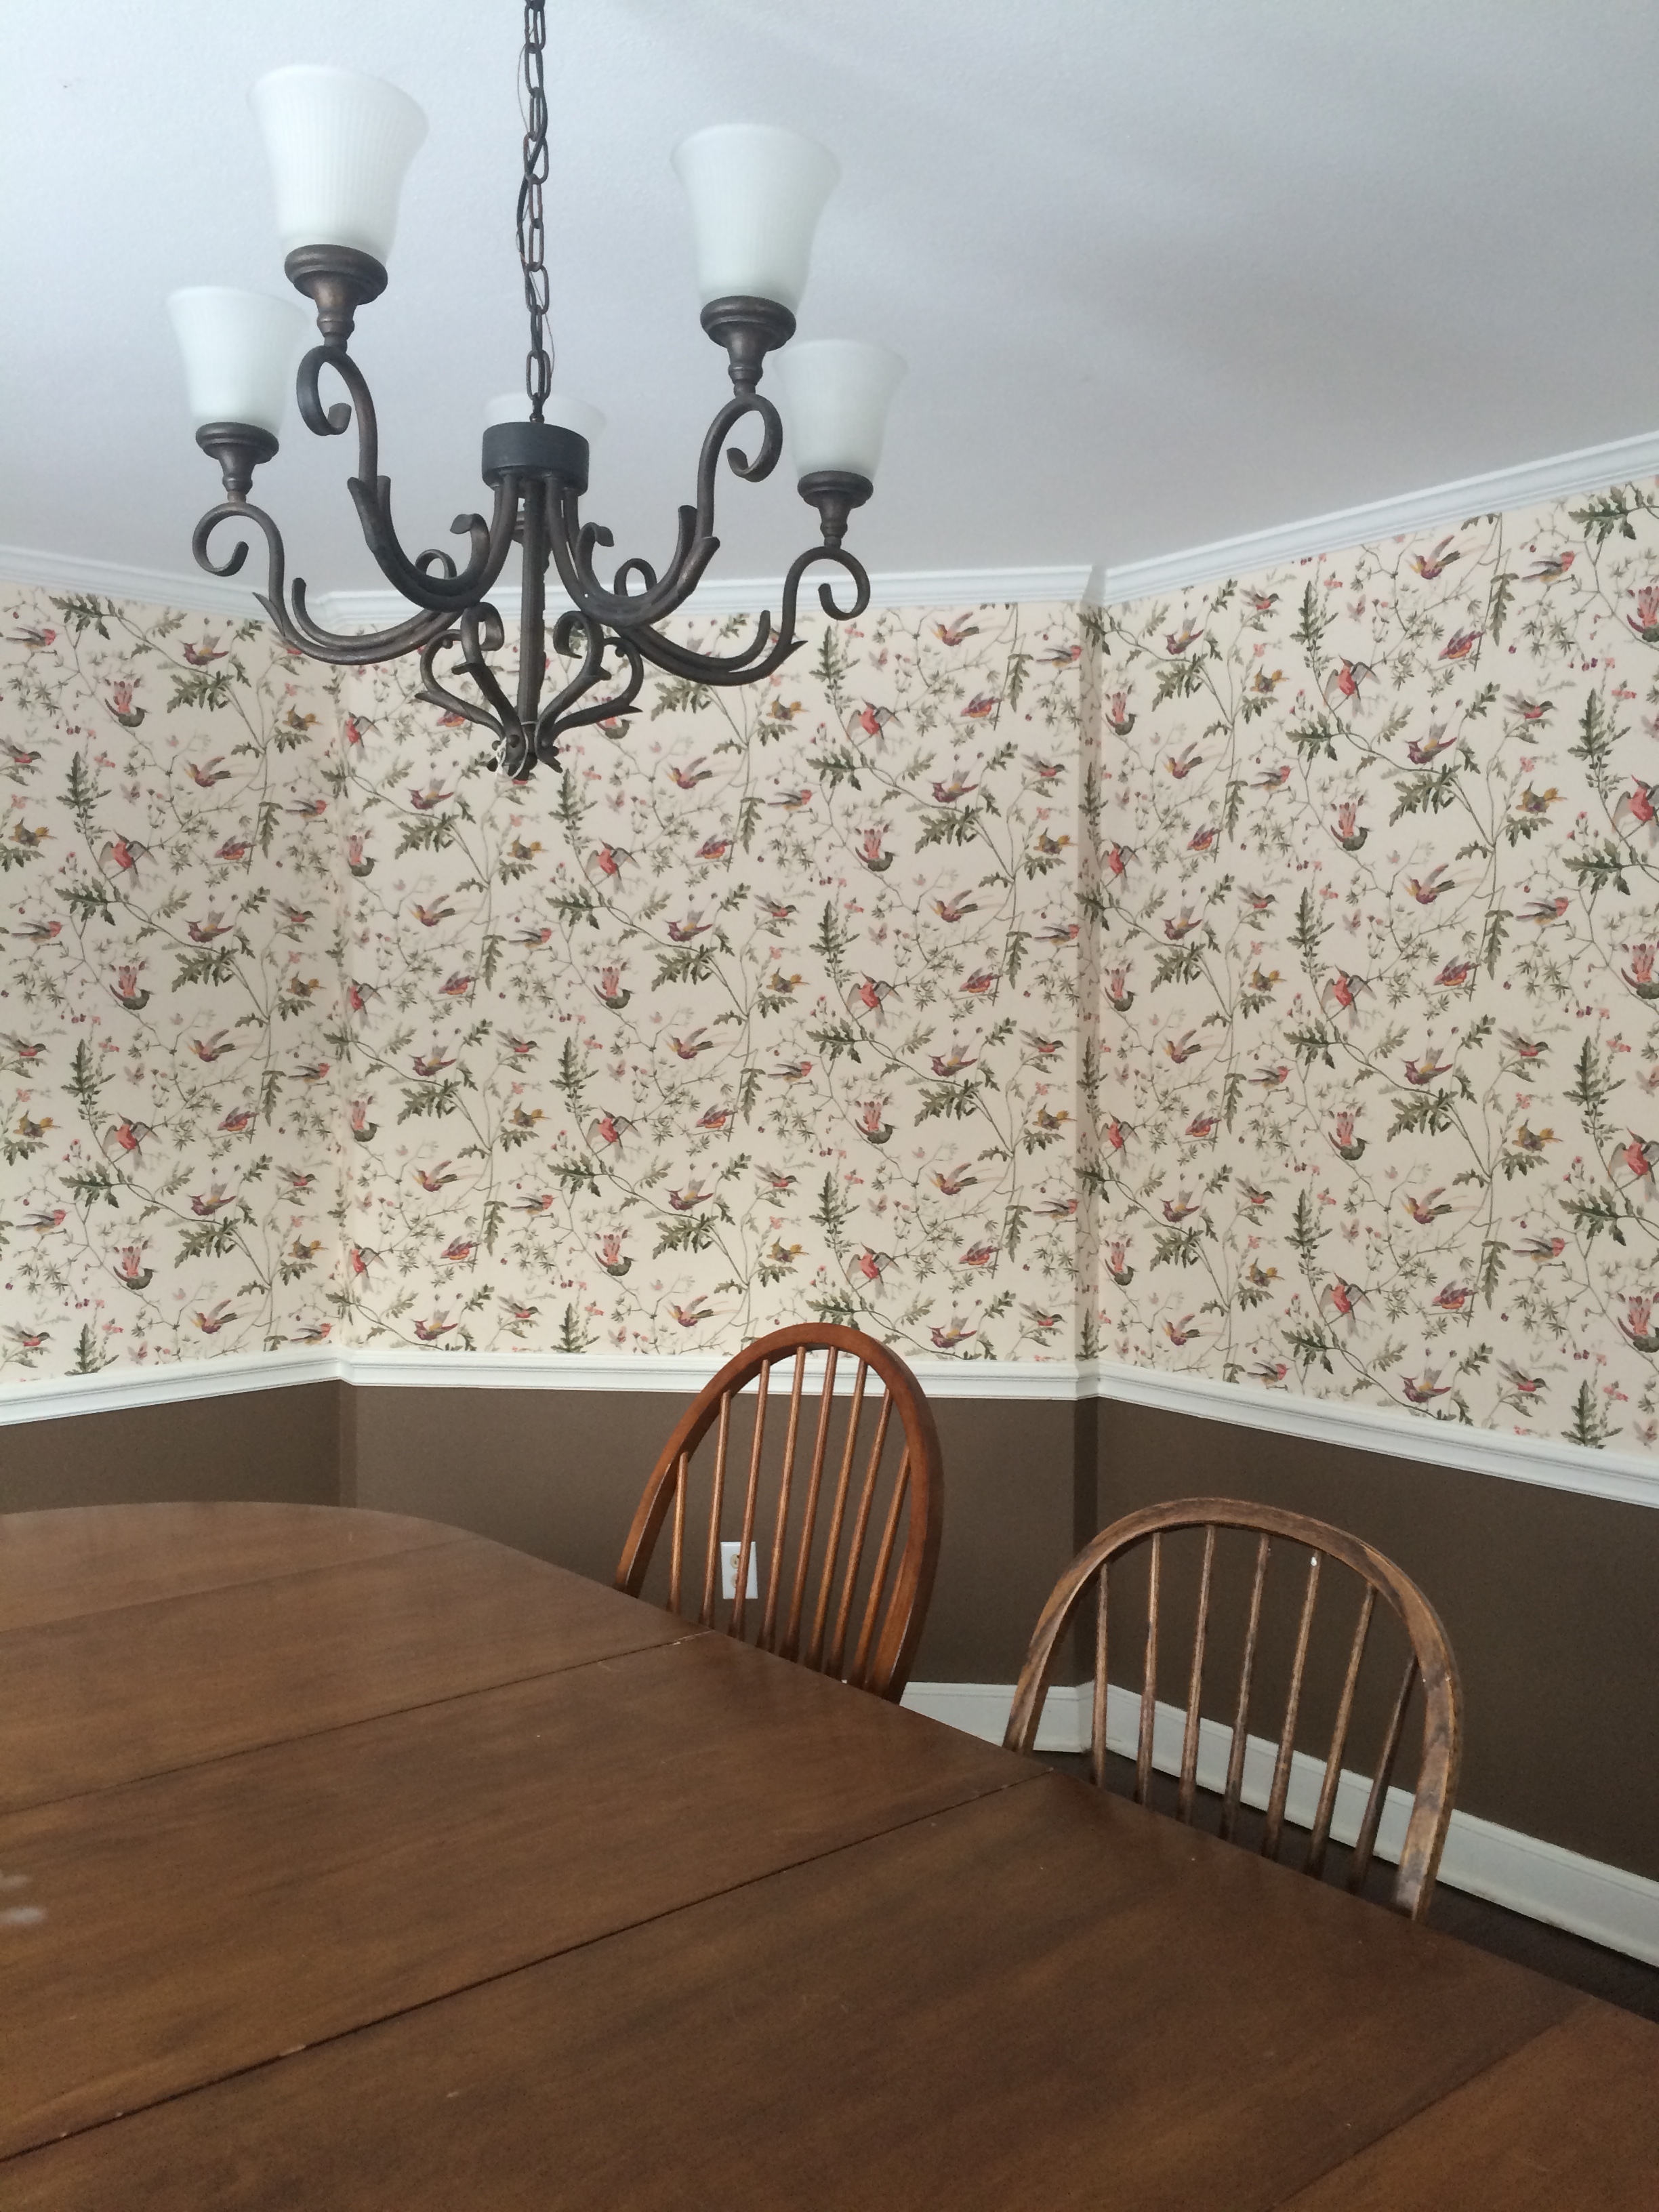 More of that lovely wallpaper in Bethany!